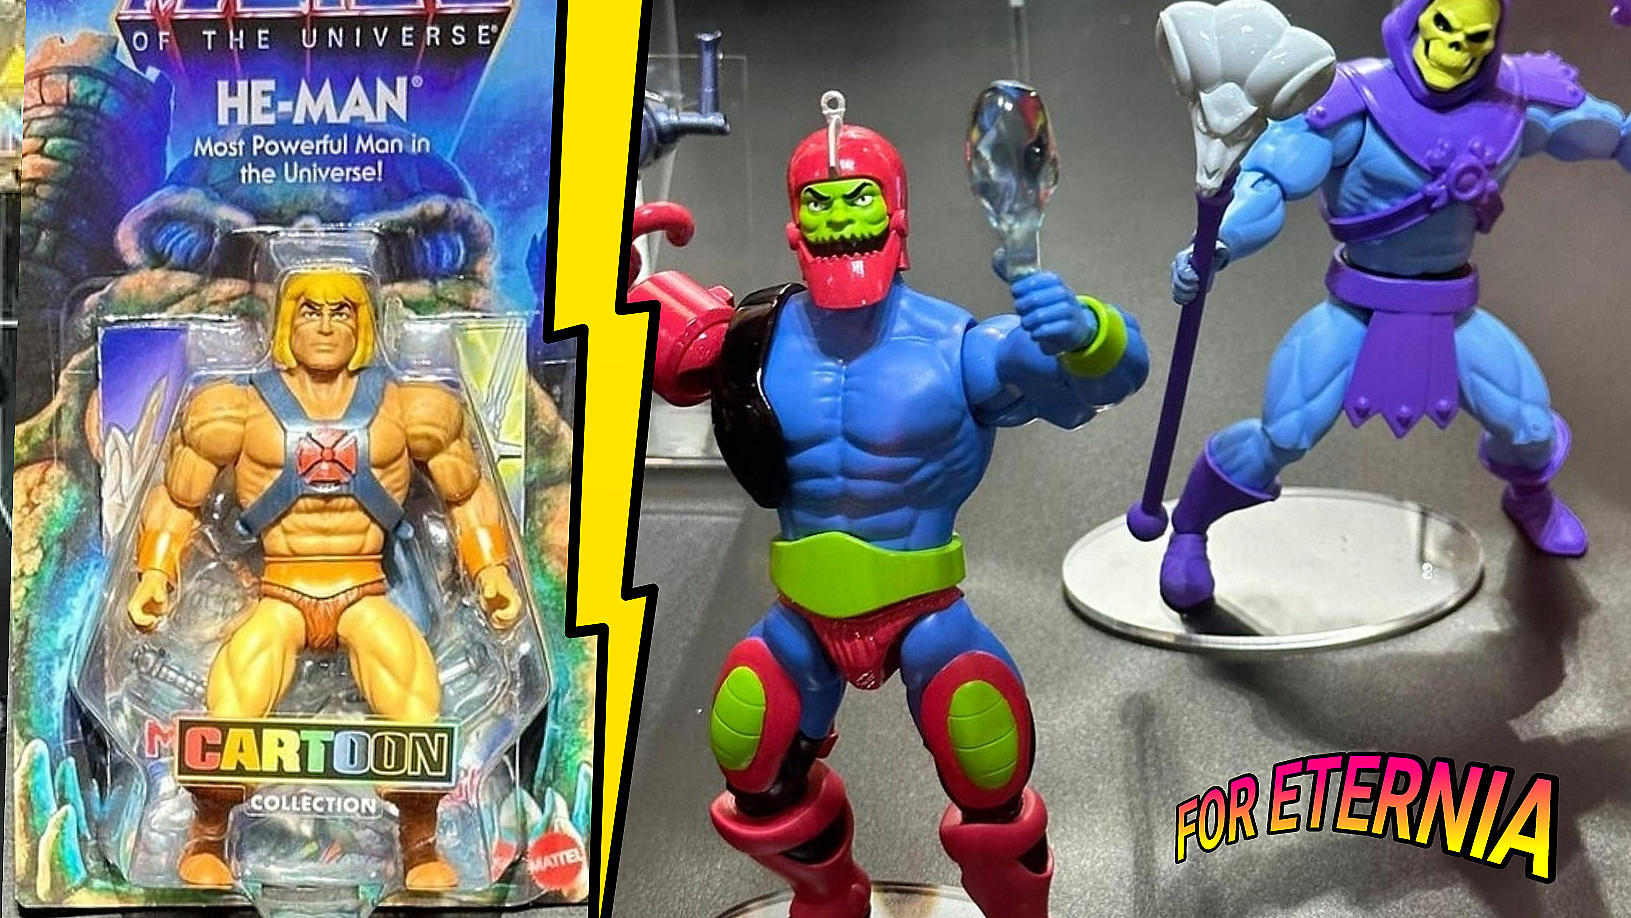 New Masters of the Universe ORIGINS Figures Revealed at Comic-Con including Filmation Figures and Packaging!